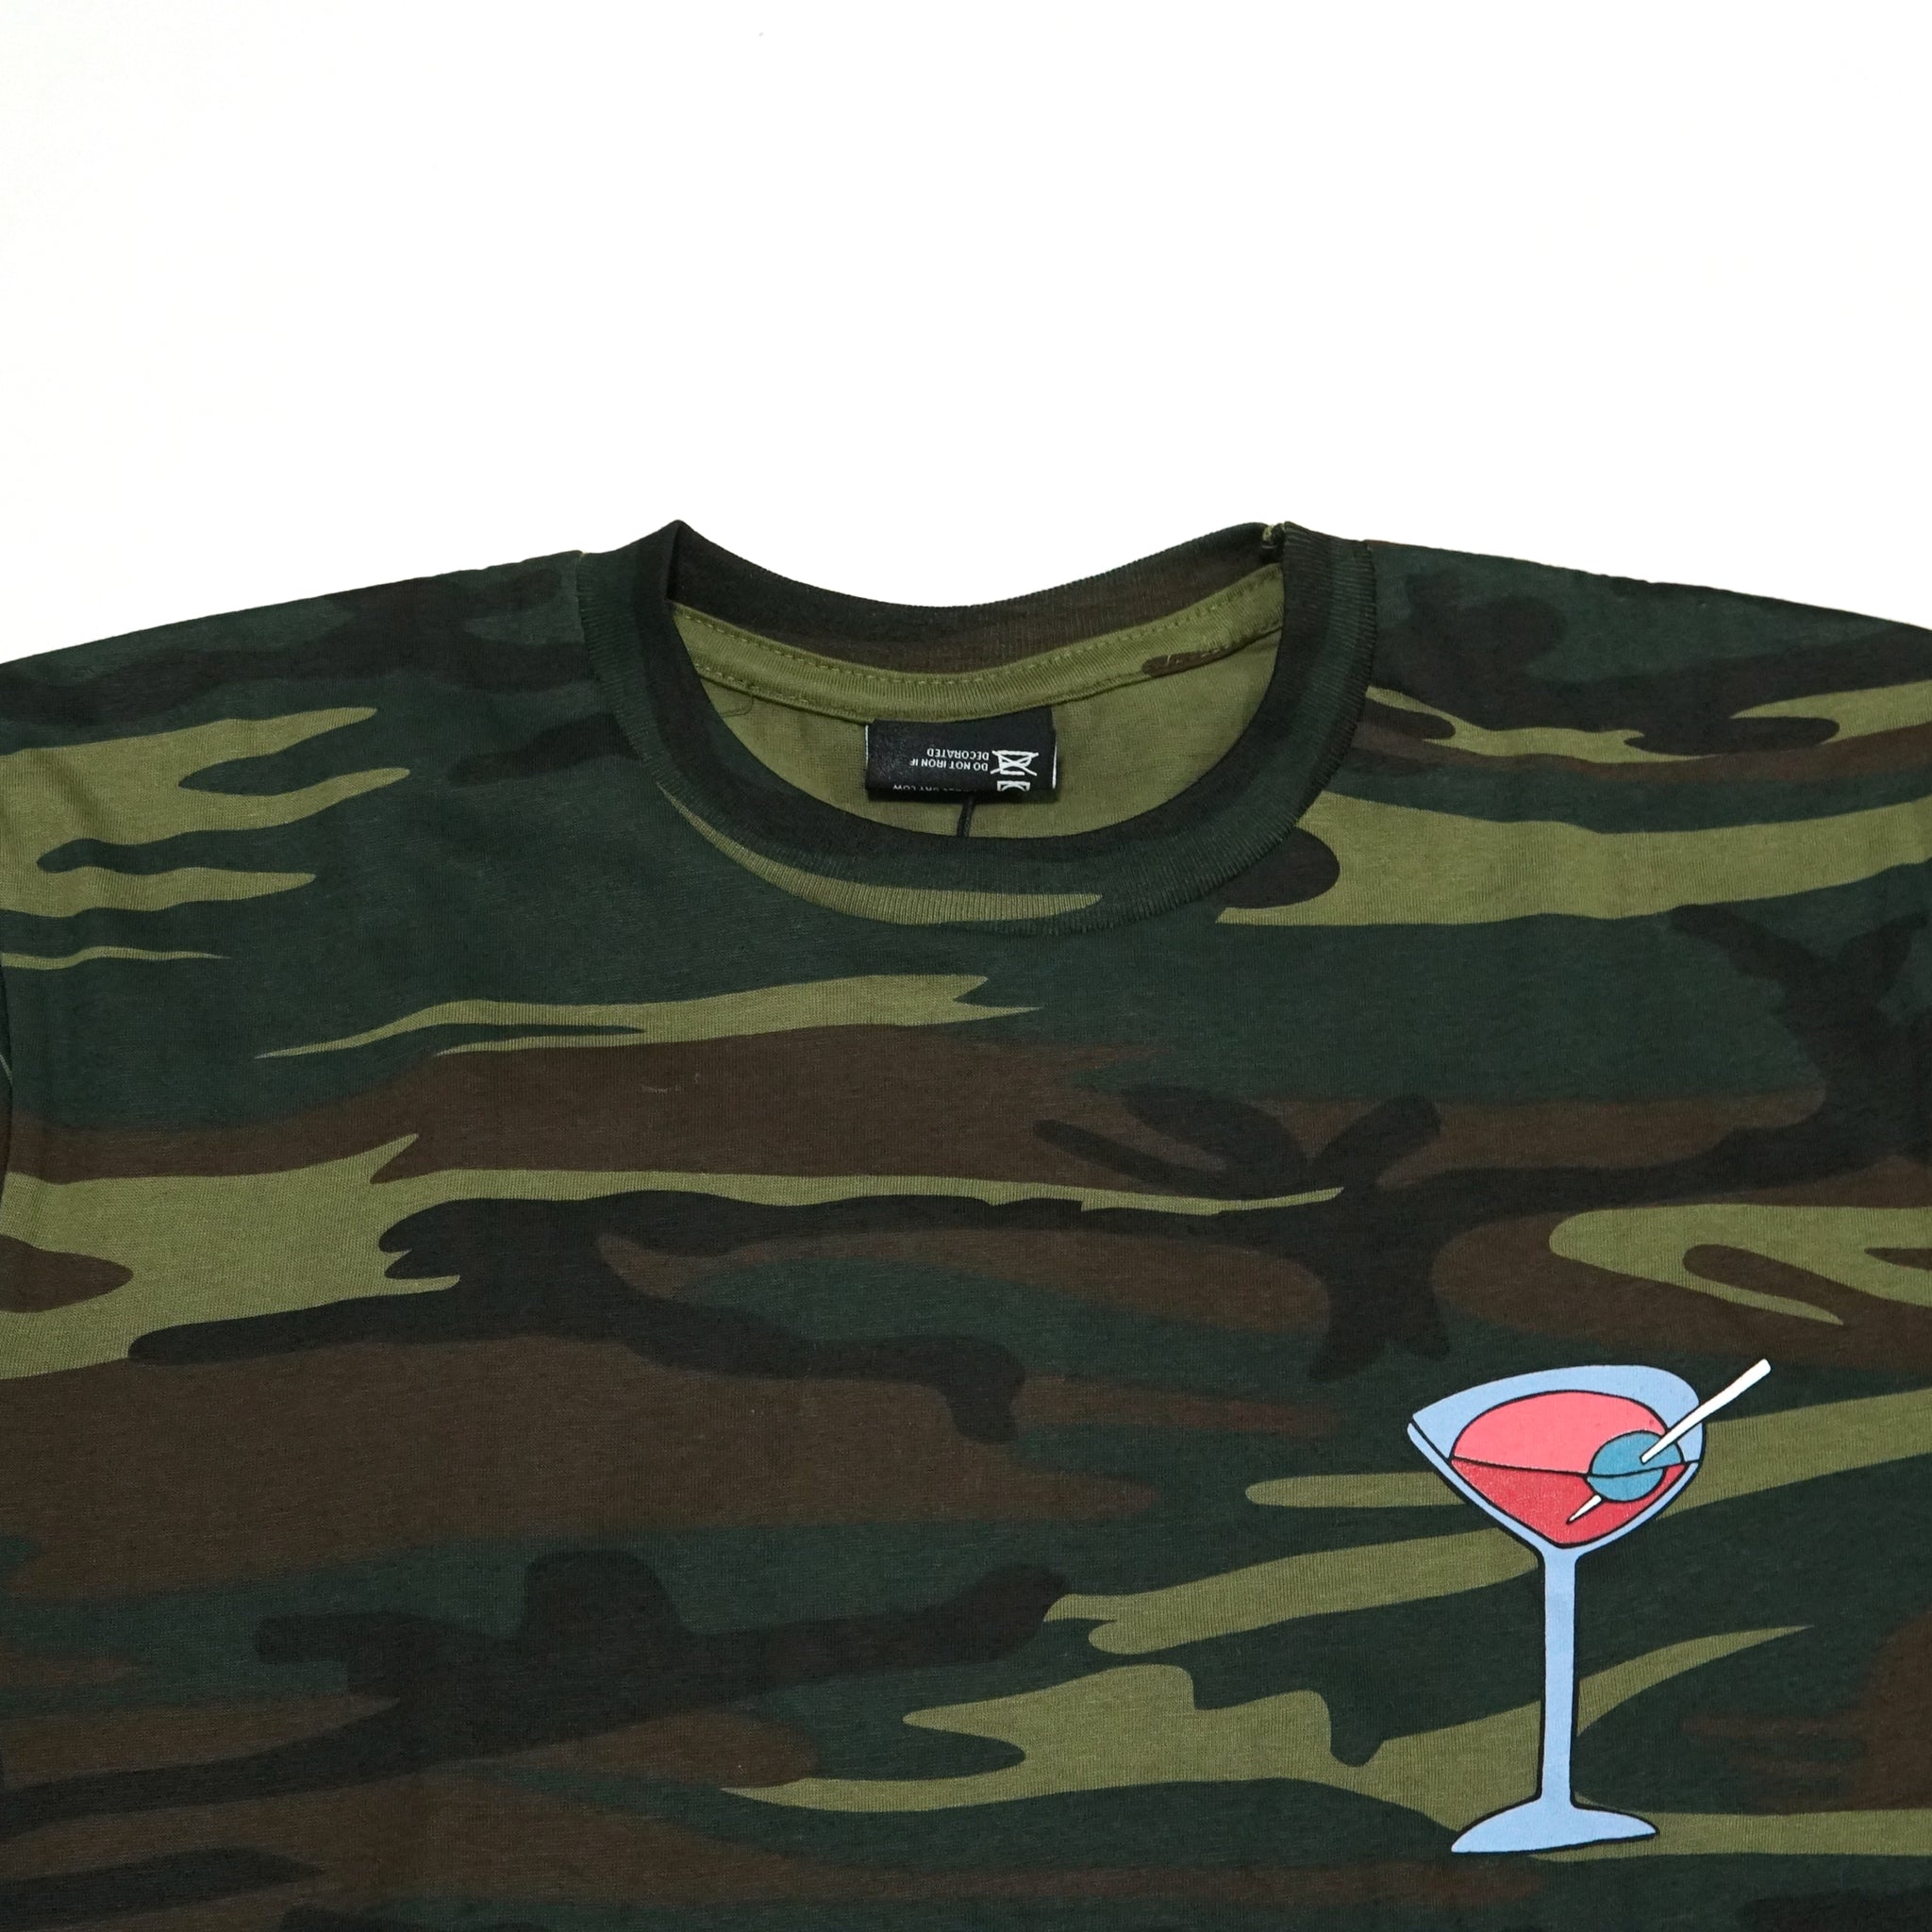 No:TS00162 | Name:DIRTY MARTINI S/S TEE | Color:Camo【TIRED_タイレッド】【ネコポス選択可能】